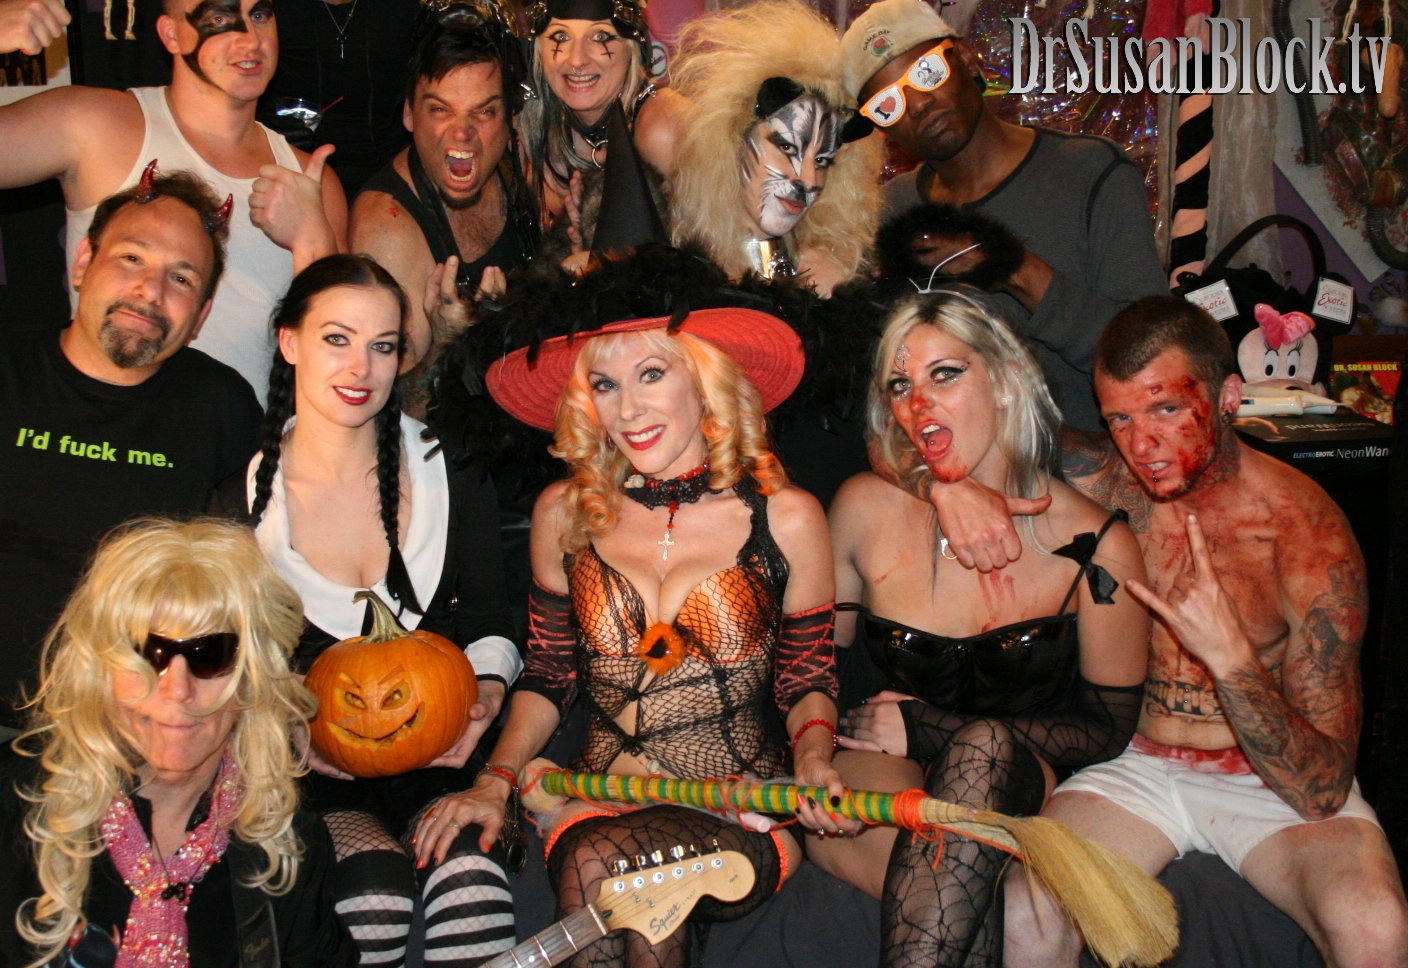 Halloween Orgy 2012: “Night of The Fornicating Dead”